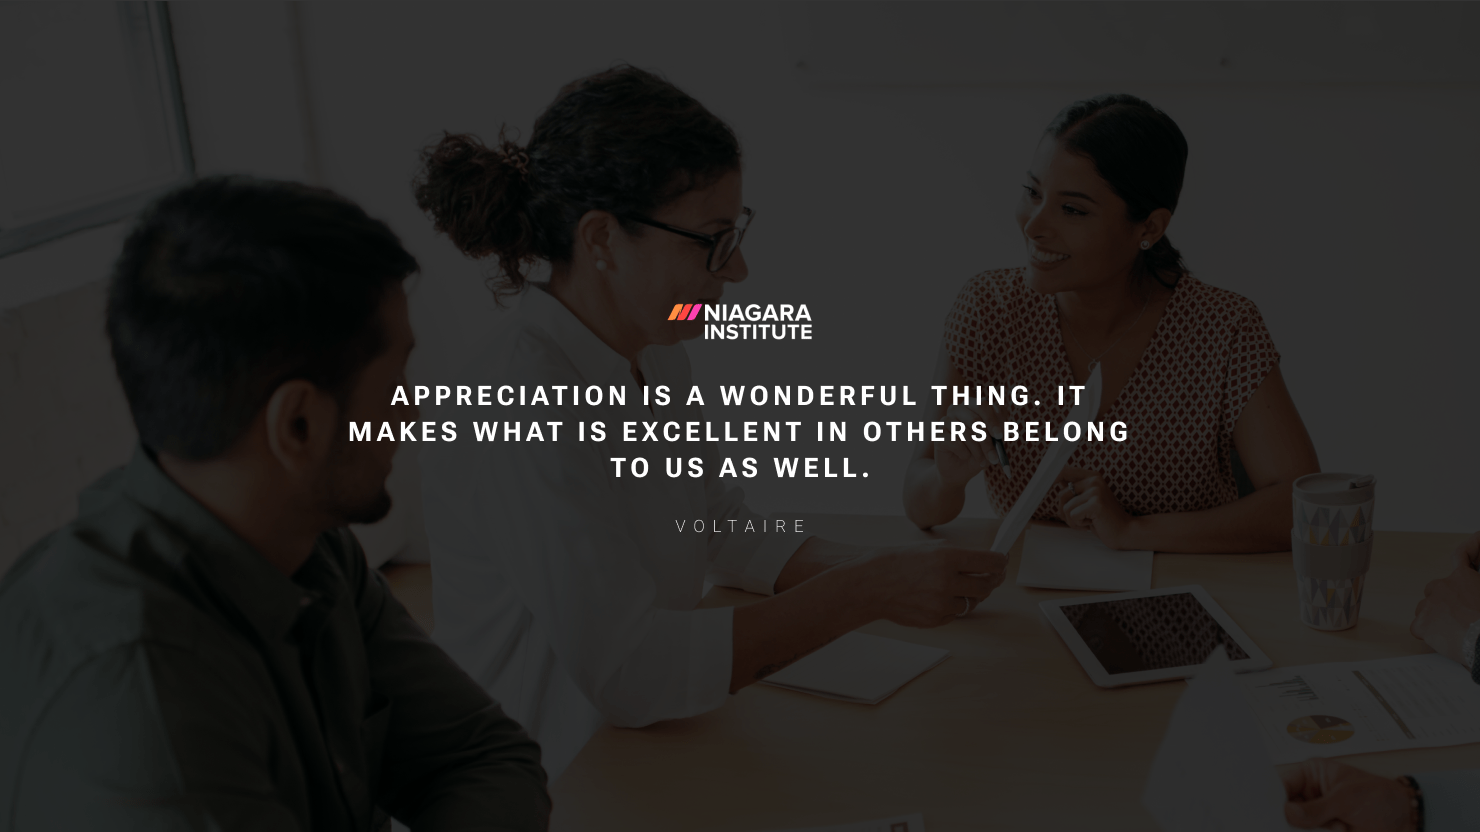 Appreciation is a wonderful thing. It makes what is excellent in others belong to us as well